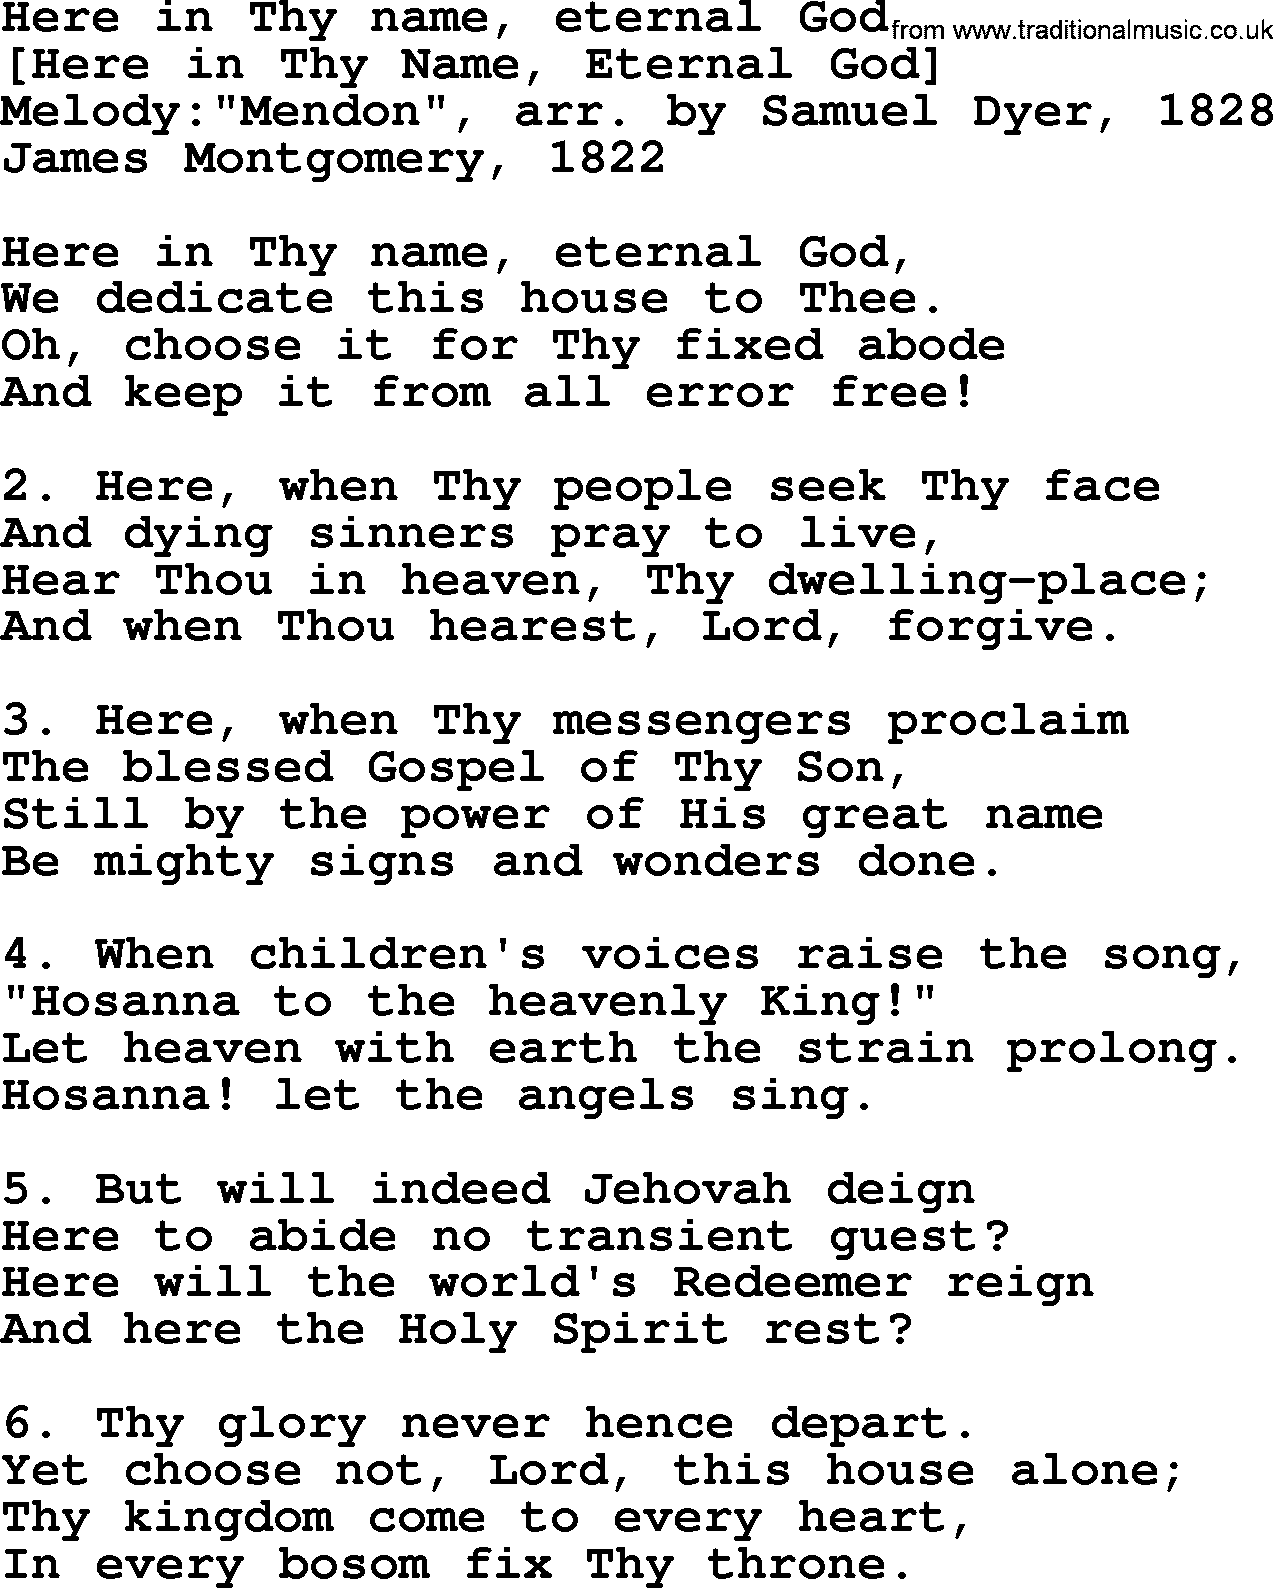 Old English Song: Here In Thy Name, Eternal God lyrics